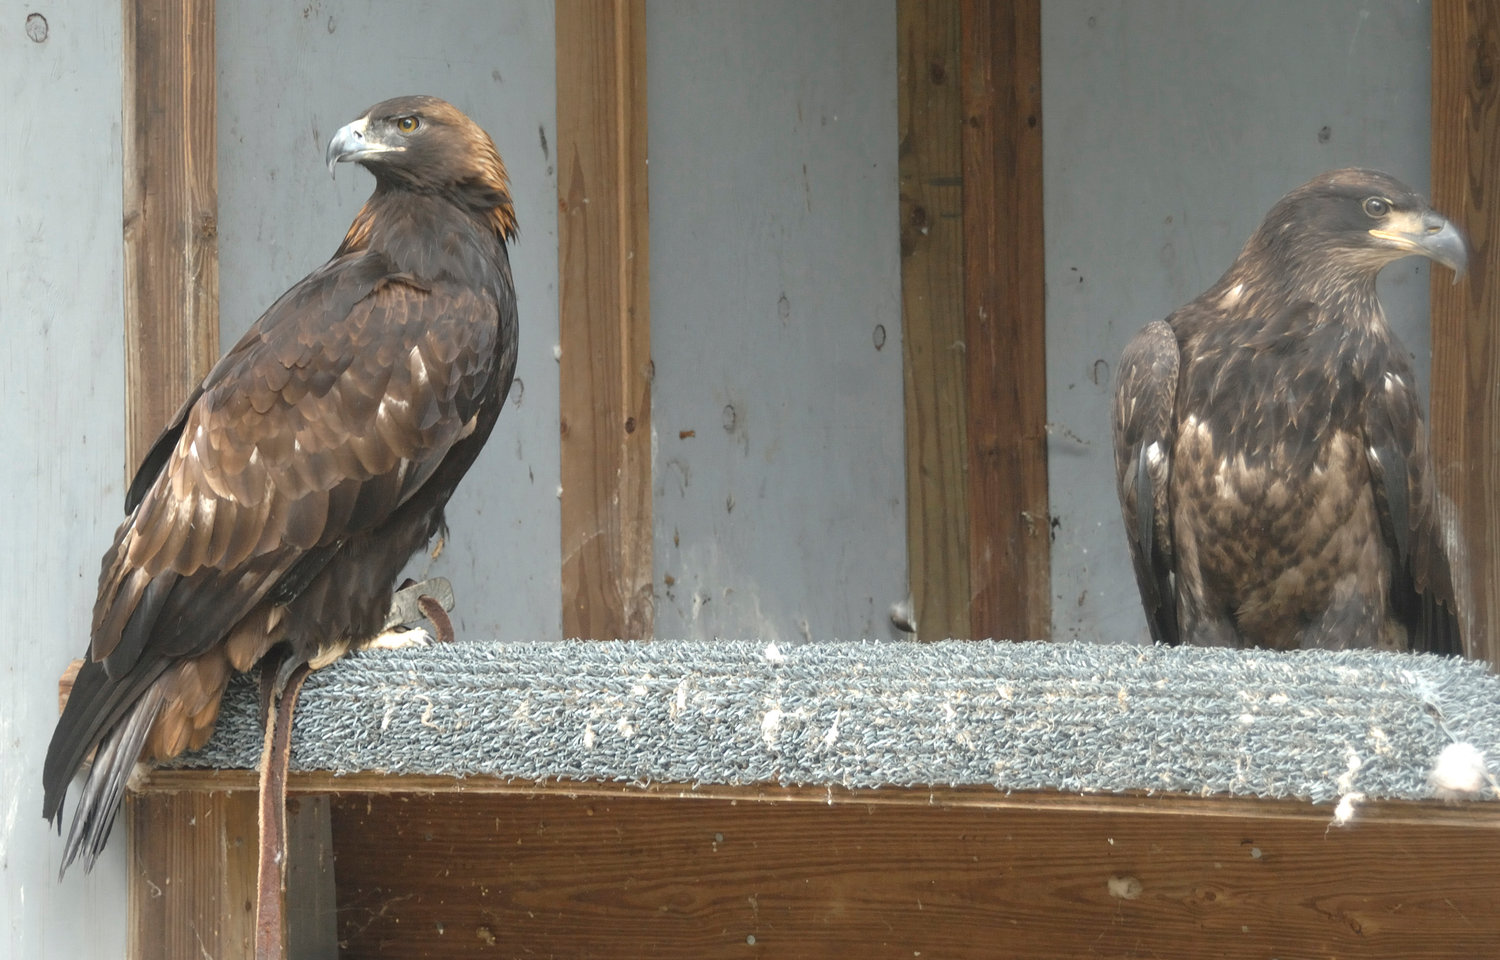 At first appearance, these two eagles at the Delaware Valley Raptor Center appear to be two immature bald eagles. However, notice the iridescence of the head, hinting of bronze (less obvious as the bird is in a shaded flight enclosure) and the shorter bill of the eagle to the left. It is an adult golden eagle. The eagle to the right is a fledgling bald eagle; its longer bill is the most notable difference.